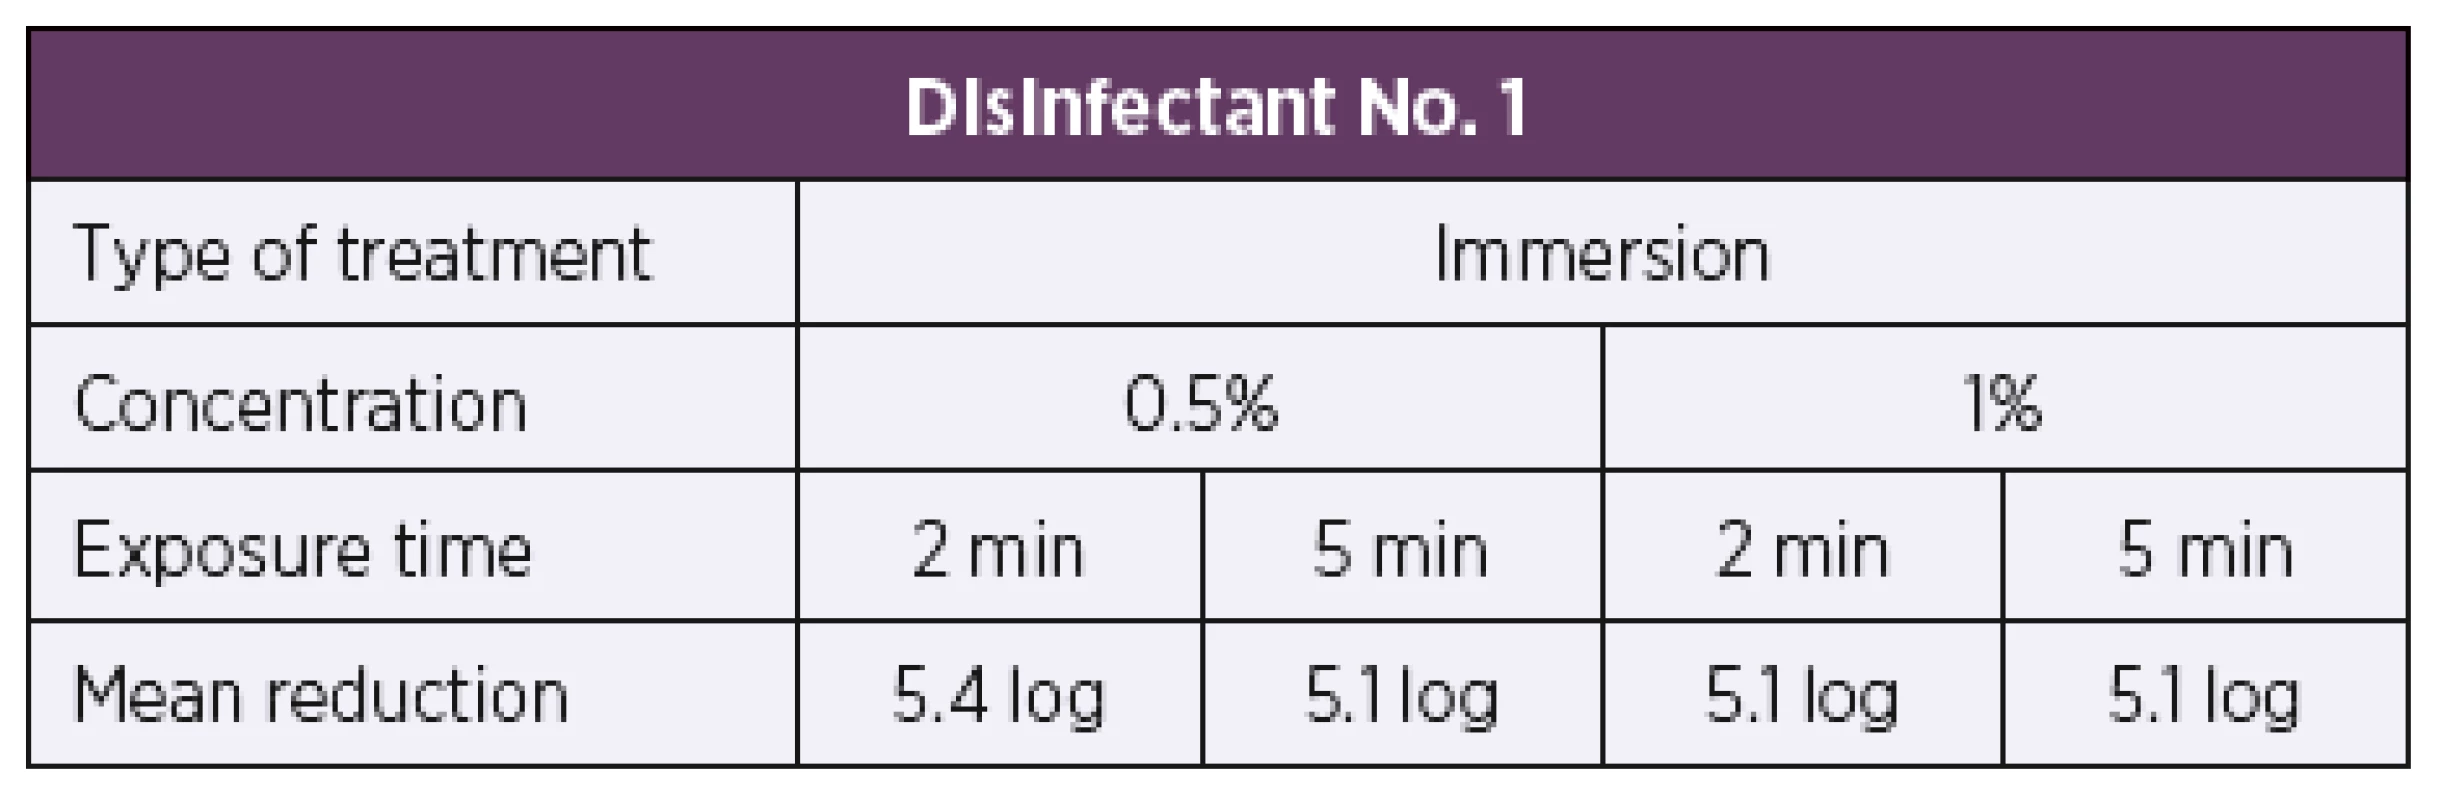 Overview of the mean log reduction in the bacterial counts
achieved using disinfectant No. 1 depending on the concentration and
exposure time when tested by the carrier immersion method